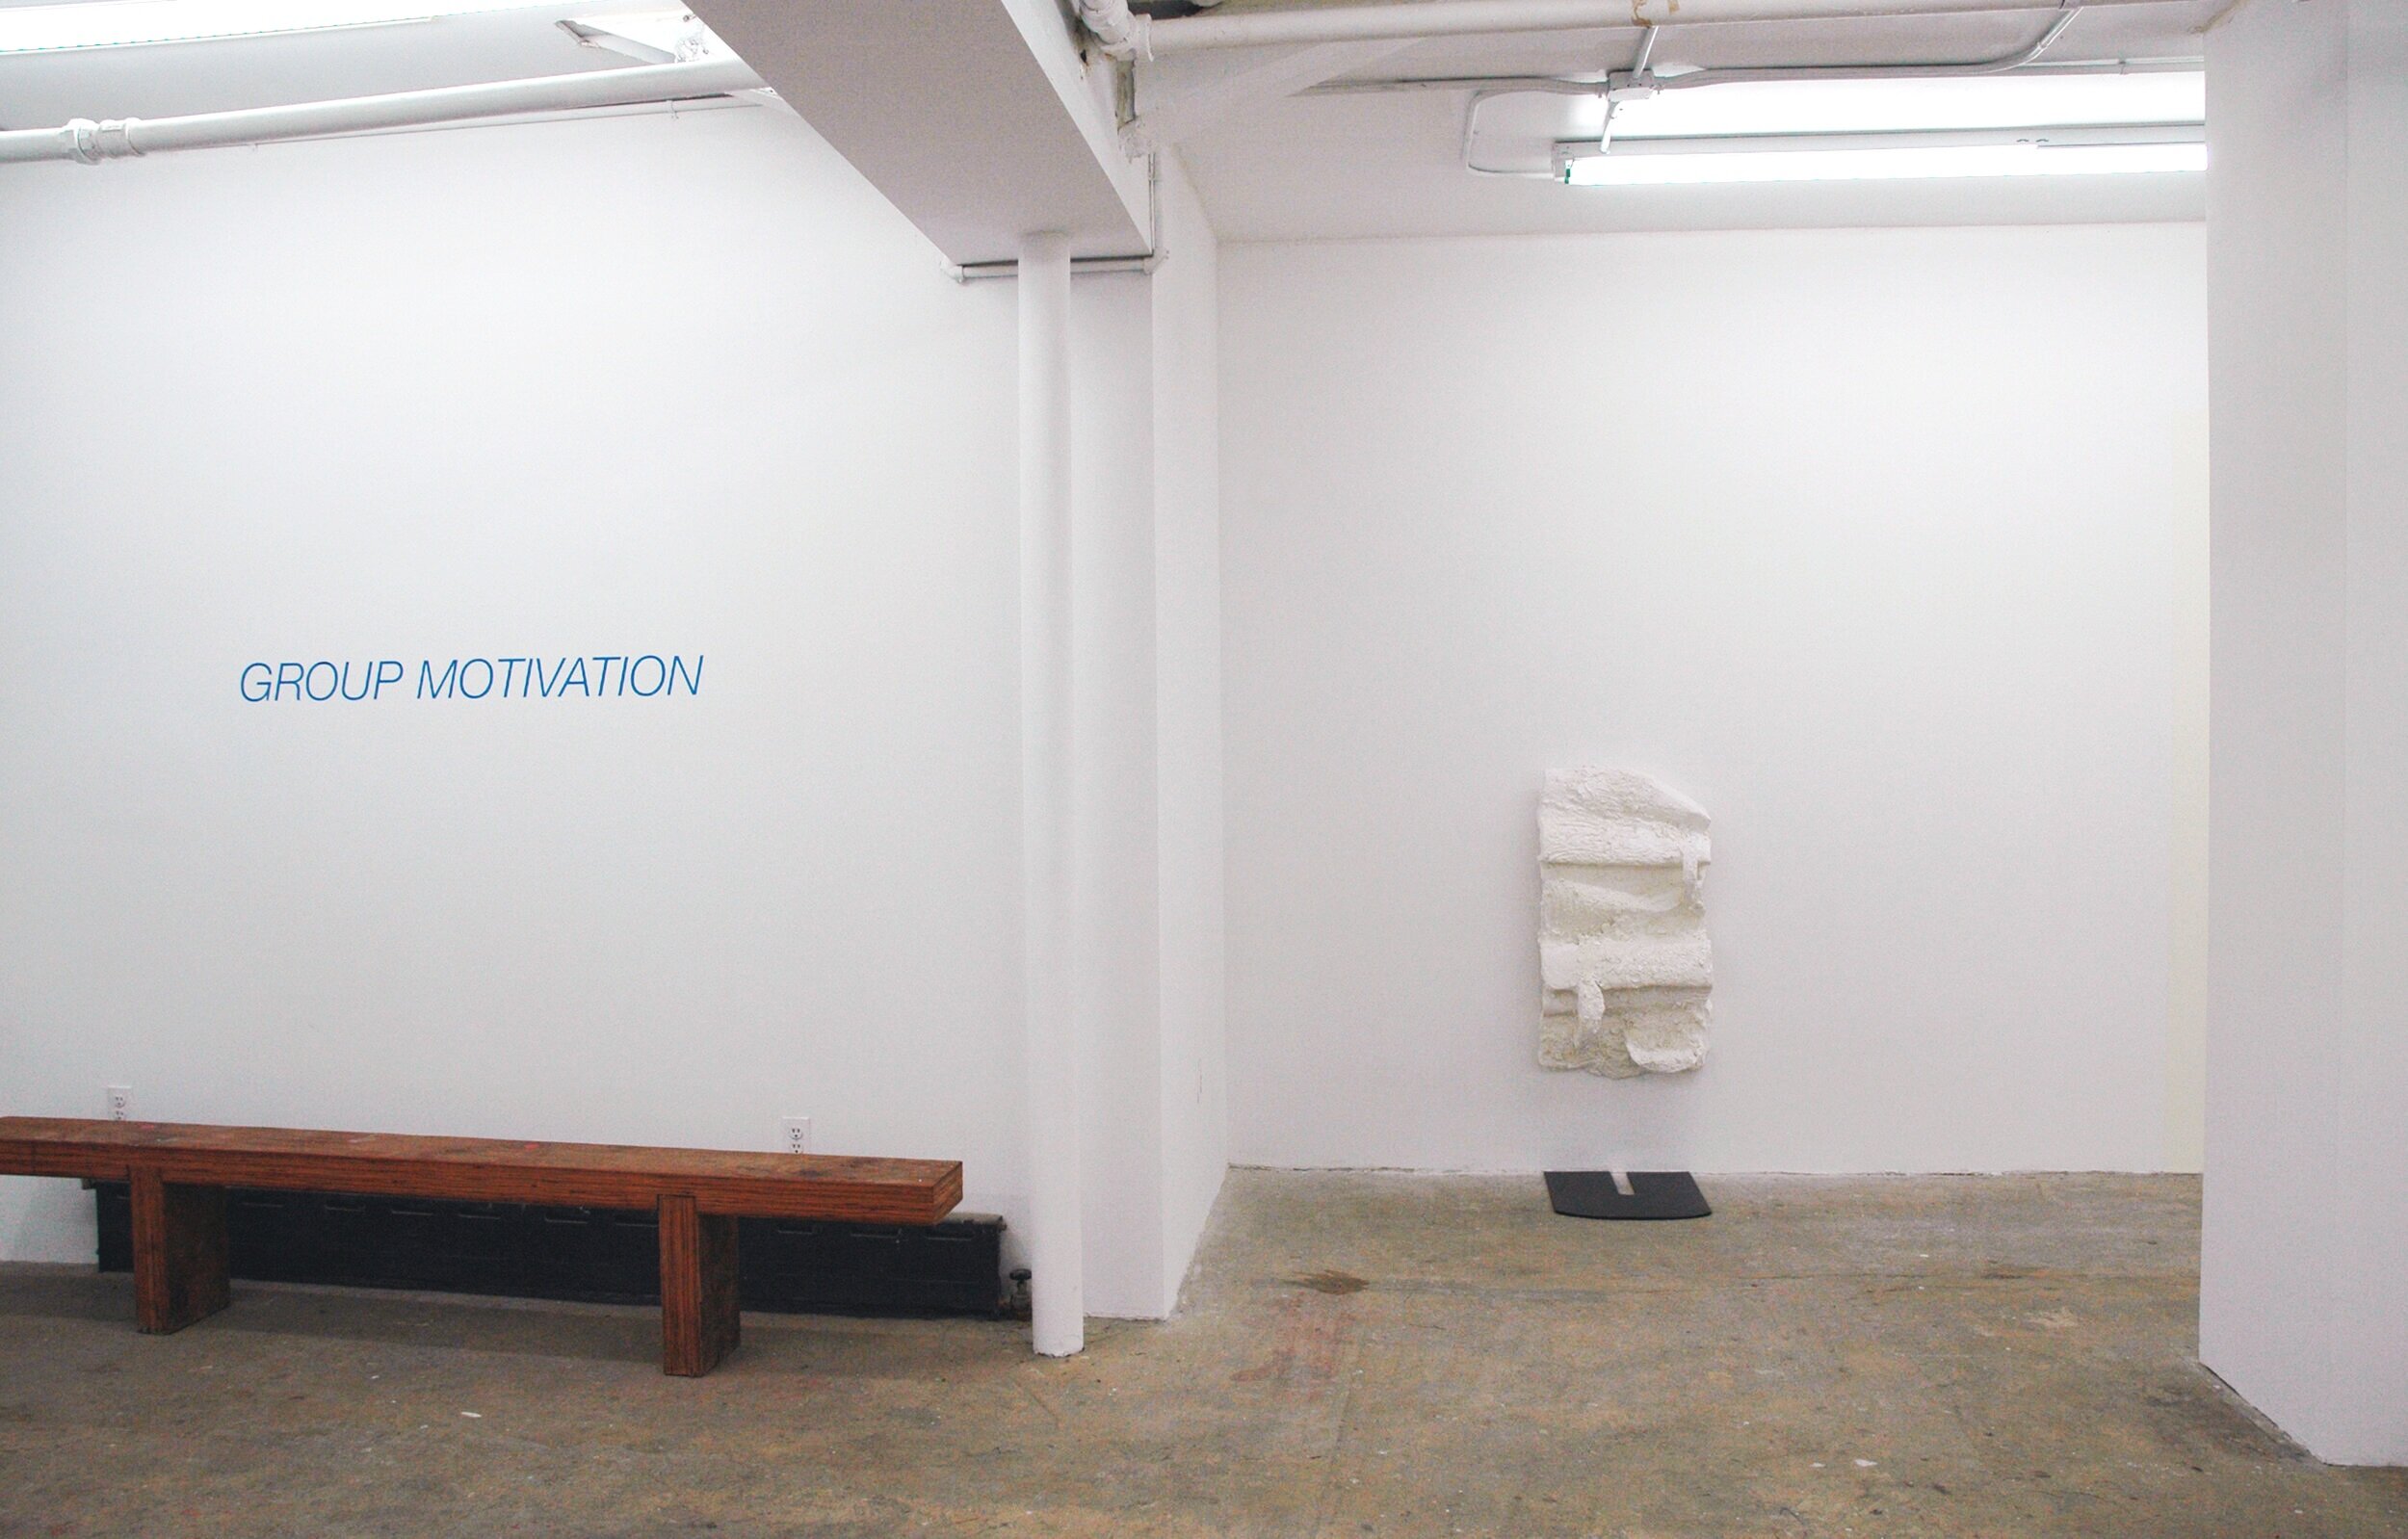 Installation image of works by Eve Ackroyd &amp; Kara Rooney from their 2017 exhibition, Group Motivation, at Cindy Rucker Gallery